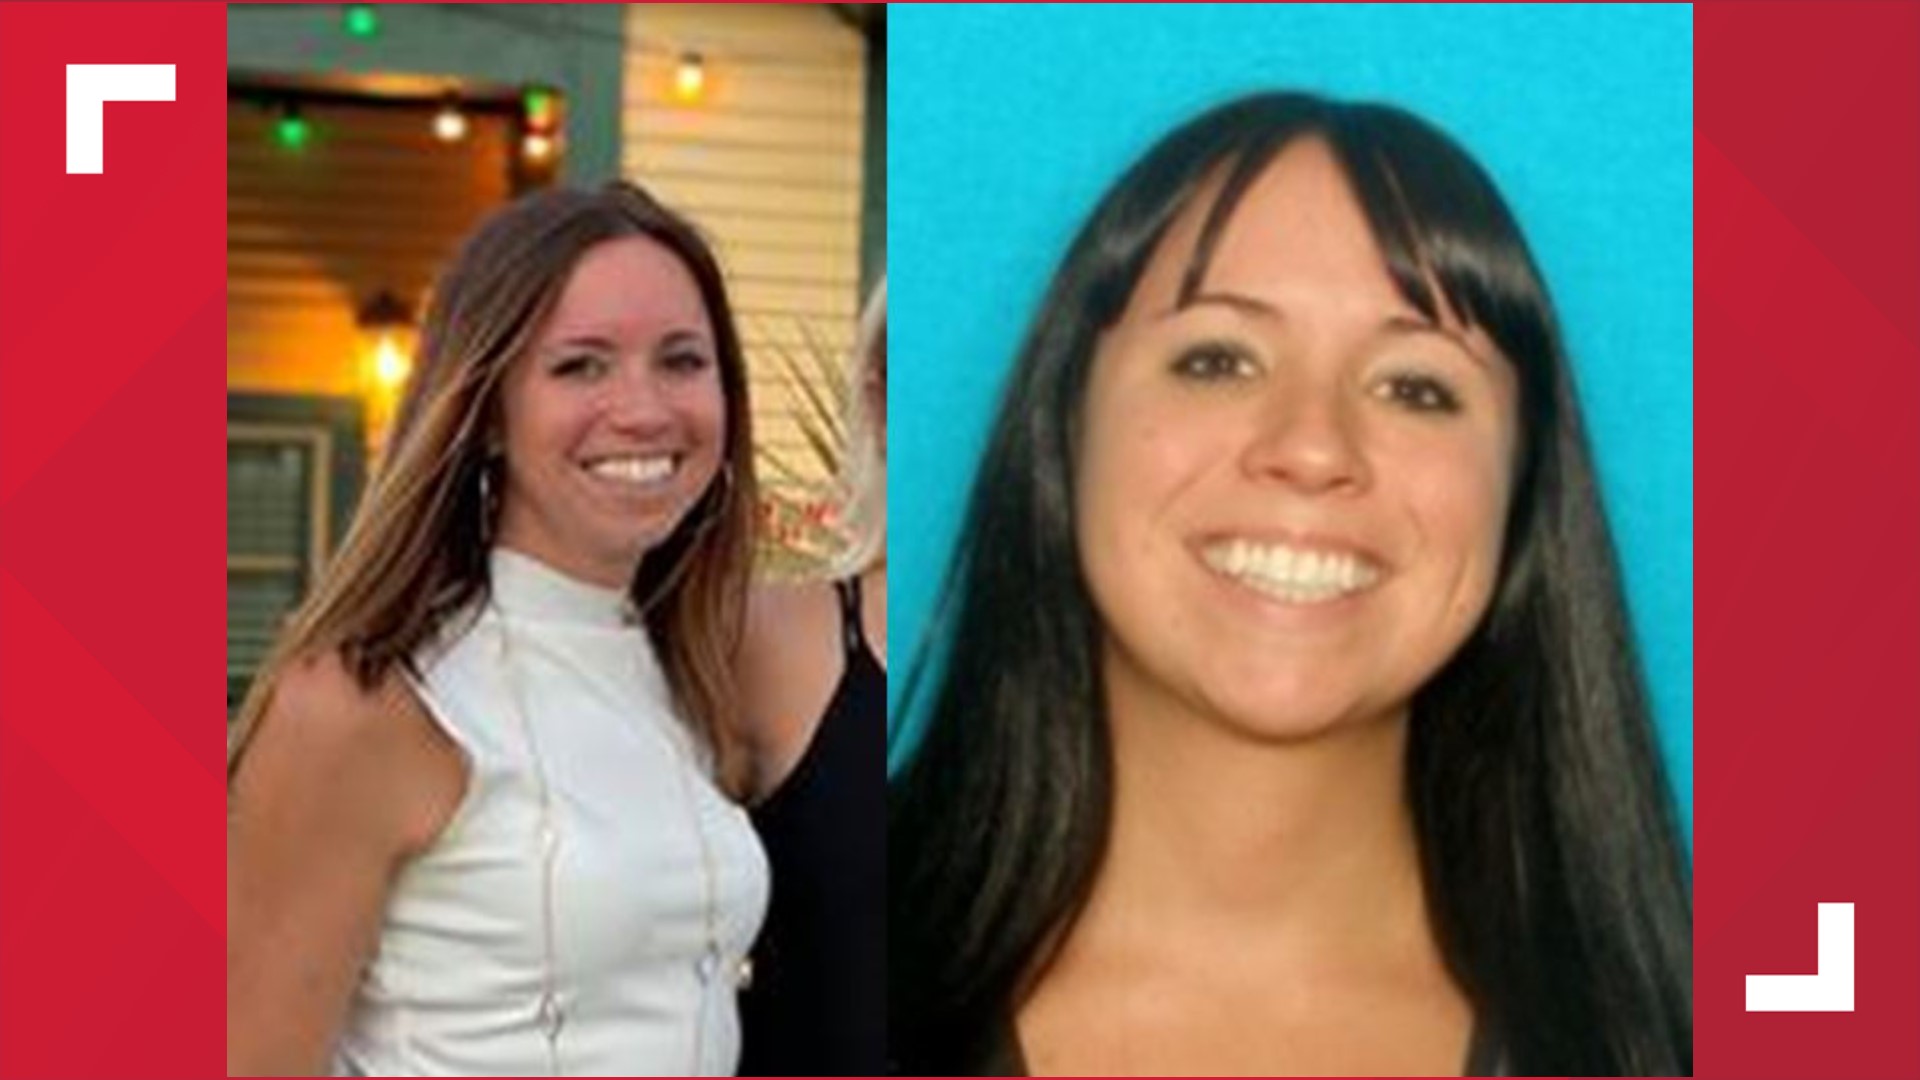 The Fort Bend County Sheriff’s Office is searching for a Richmond woman, Allison Kempe, last seen at a restaurant Friday night.